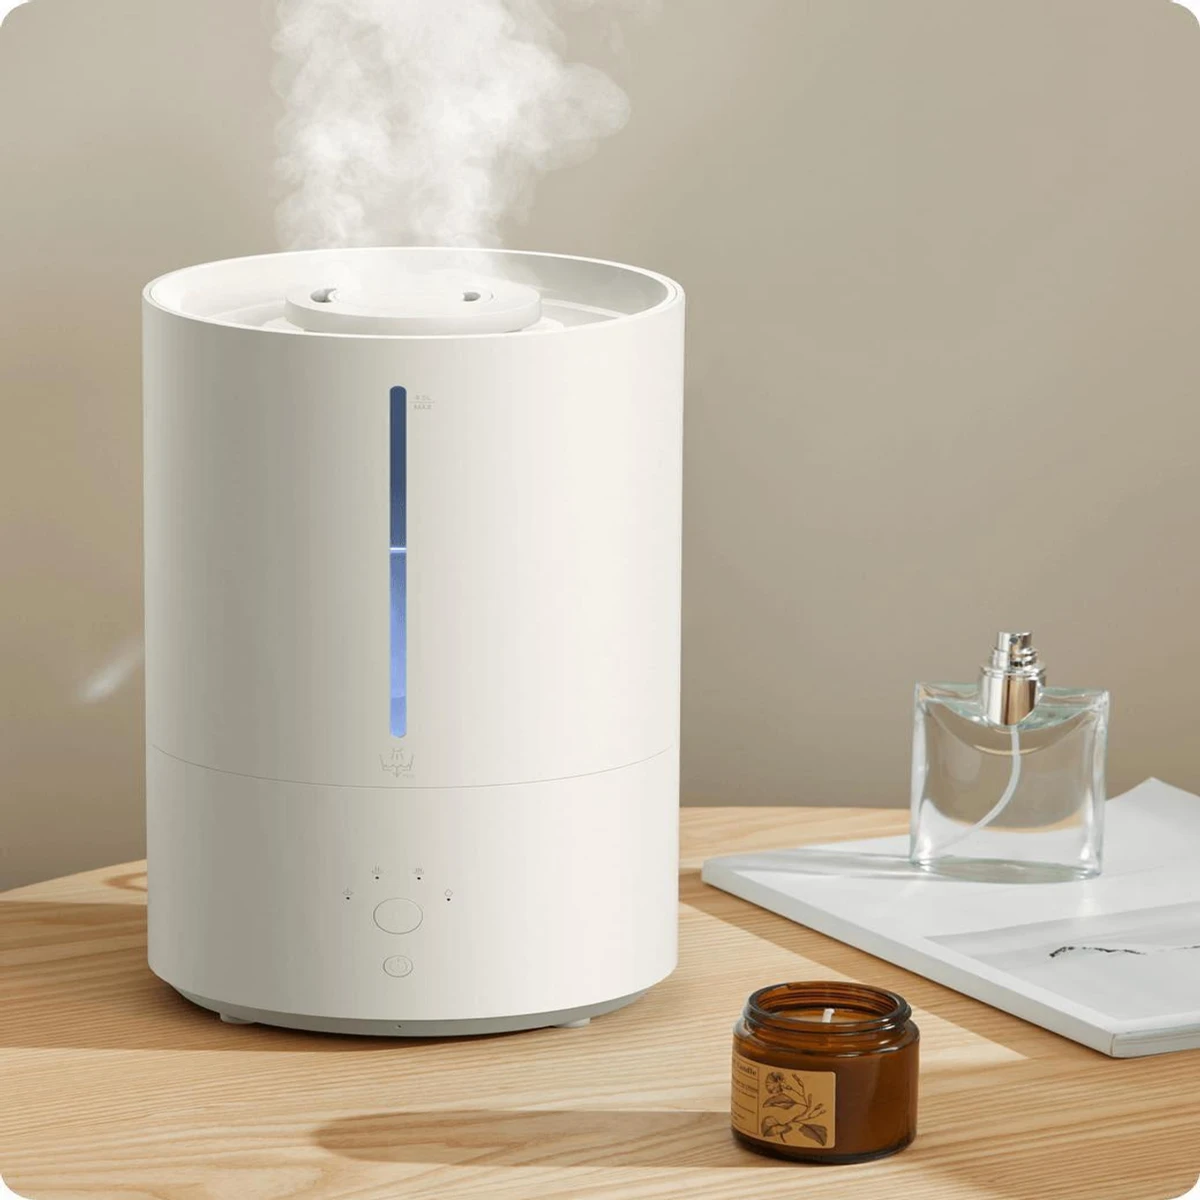 Xiaomi Humidifier 2 Lite 4L Household Office Mist Maker Air Purifying Diffuser